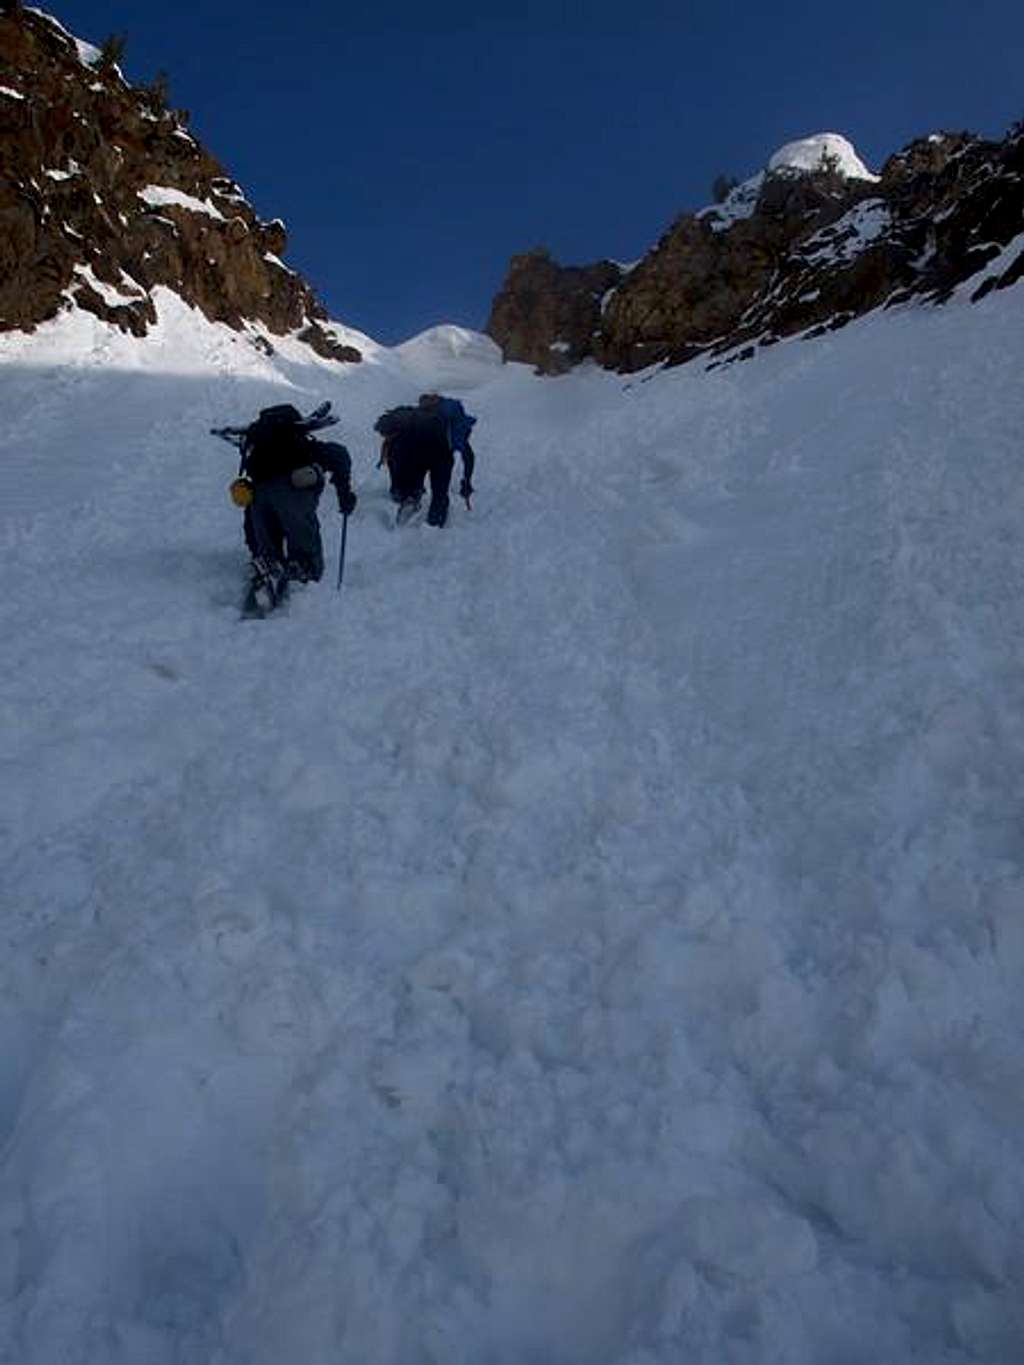 Chris, Walt, and Lubos approaching Tanners saddle